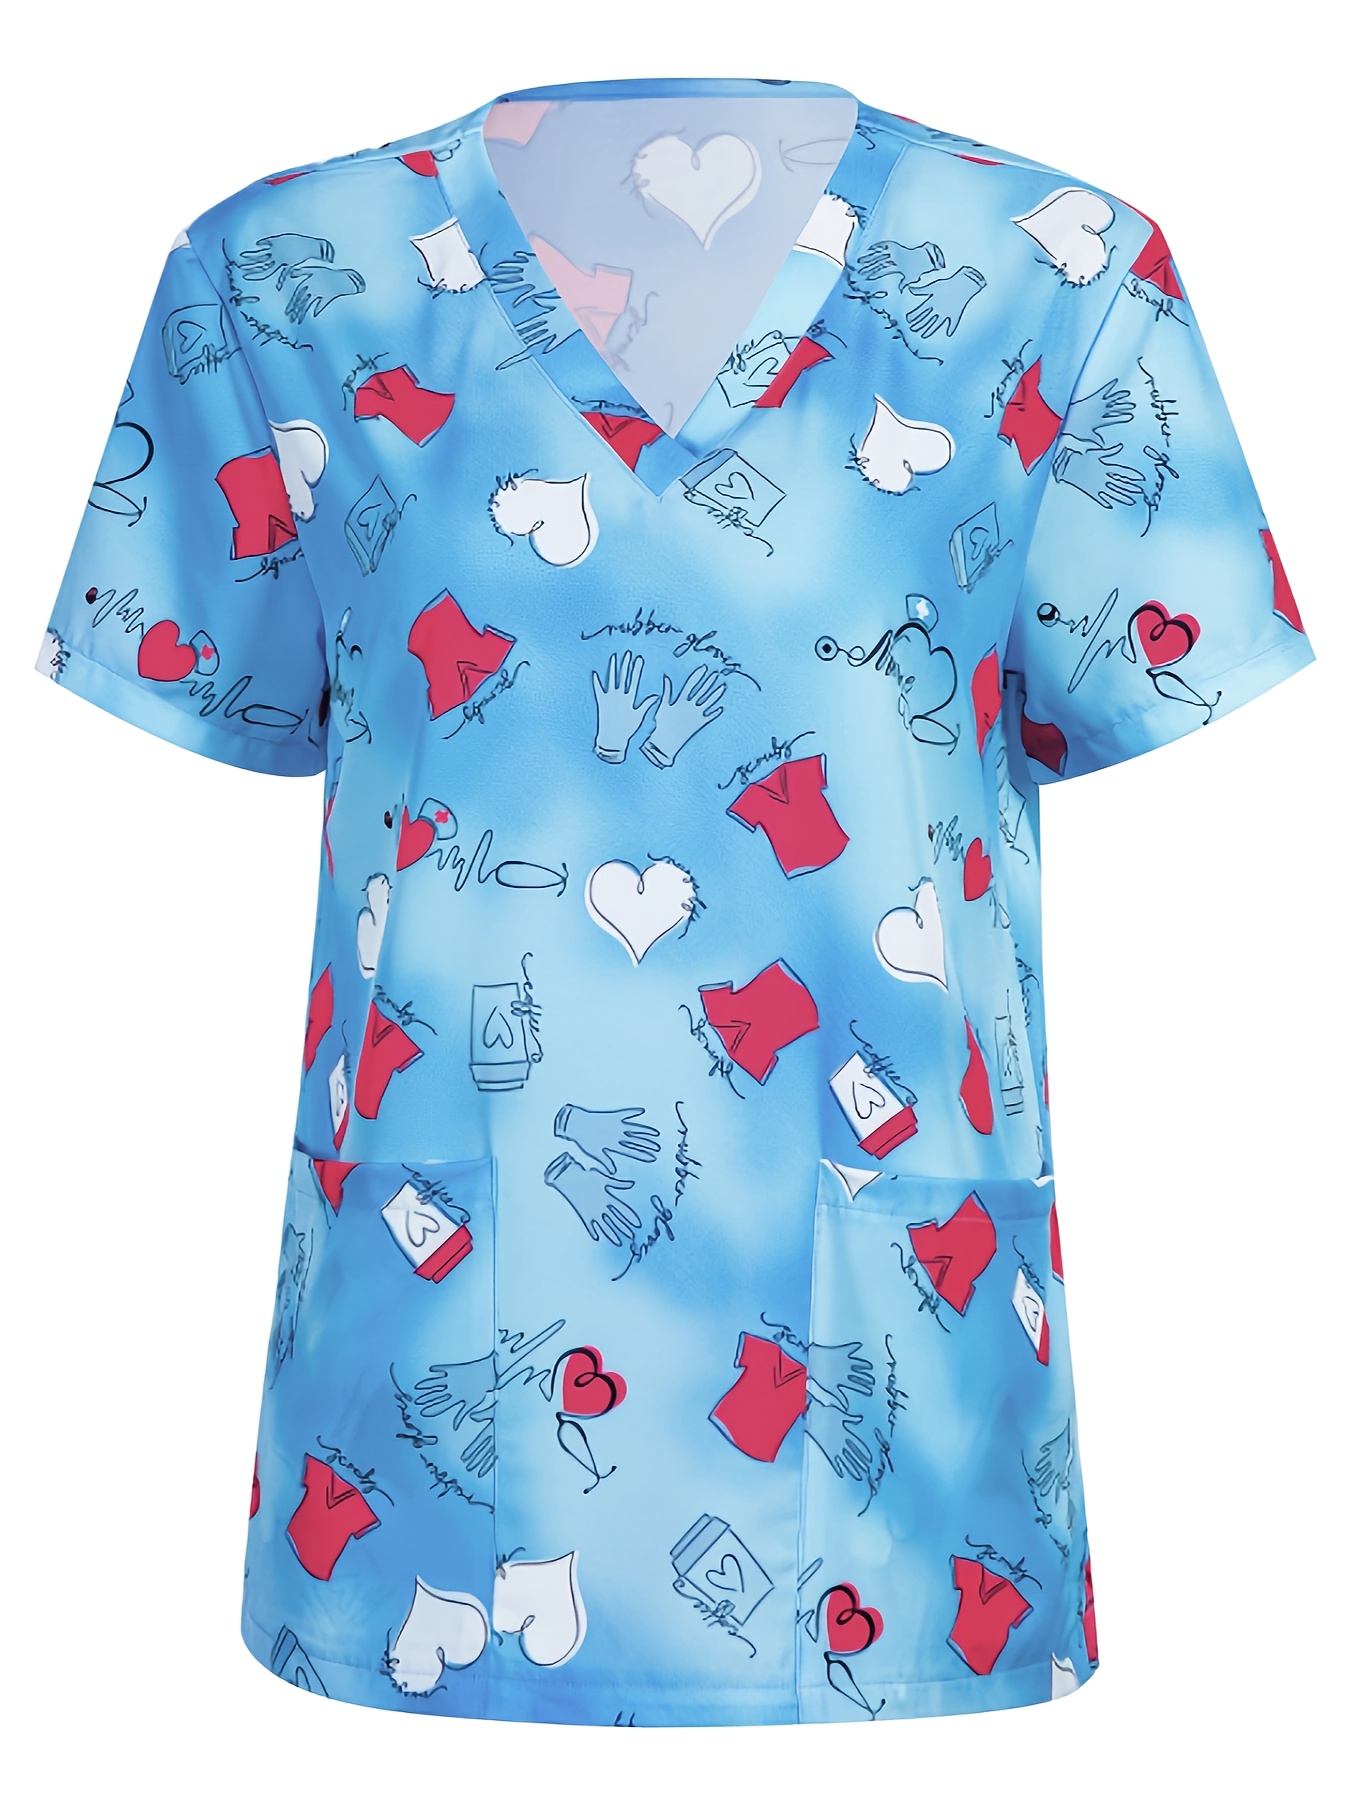 Heart & Clothes Print Scrubs Top, V Neck Functional Patched Pockets Health Care Uniform, Women's Clothing